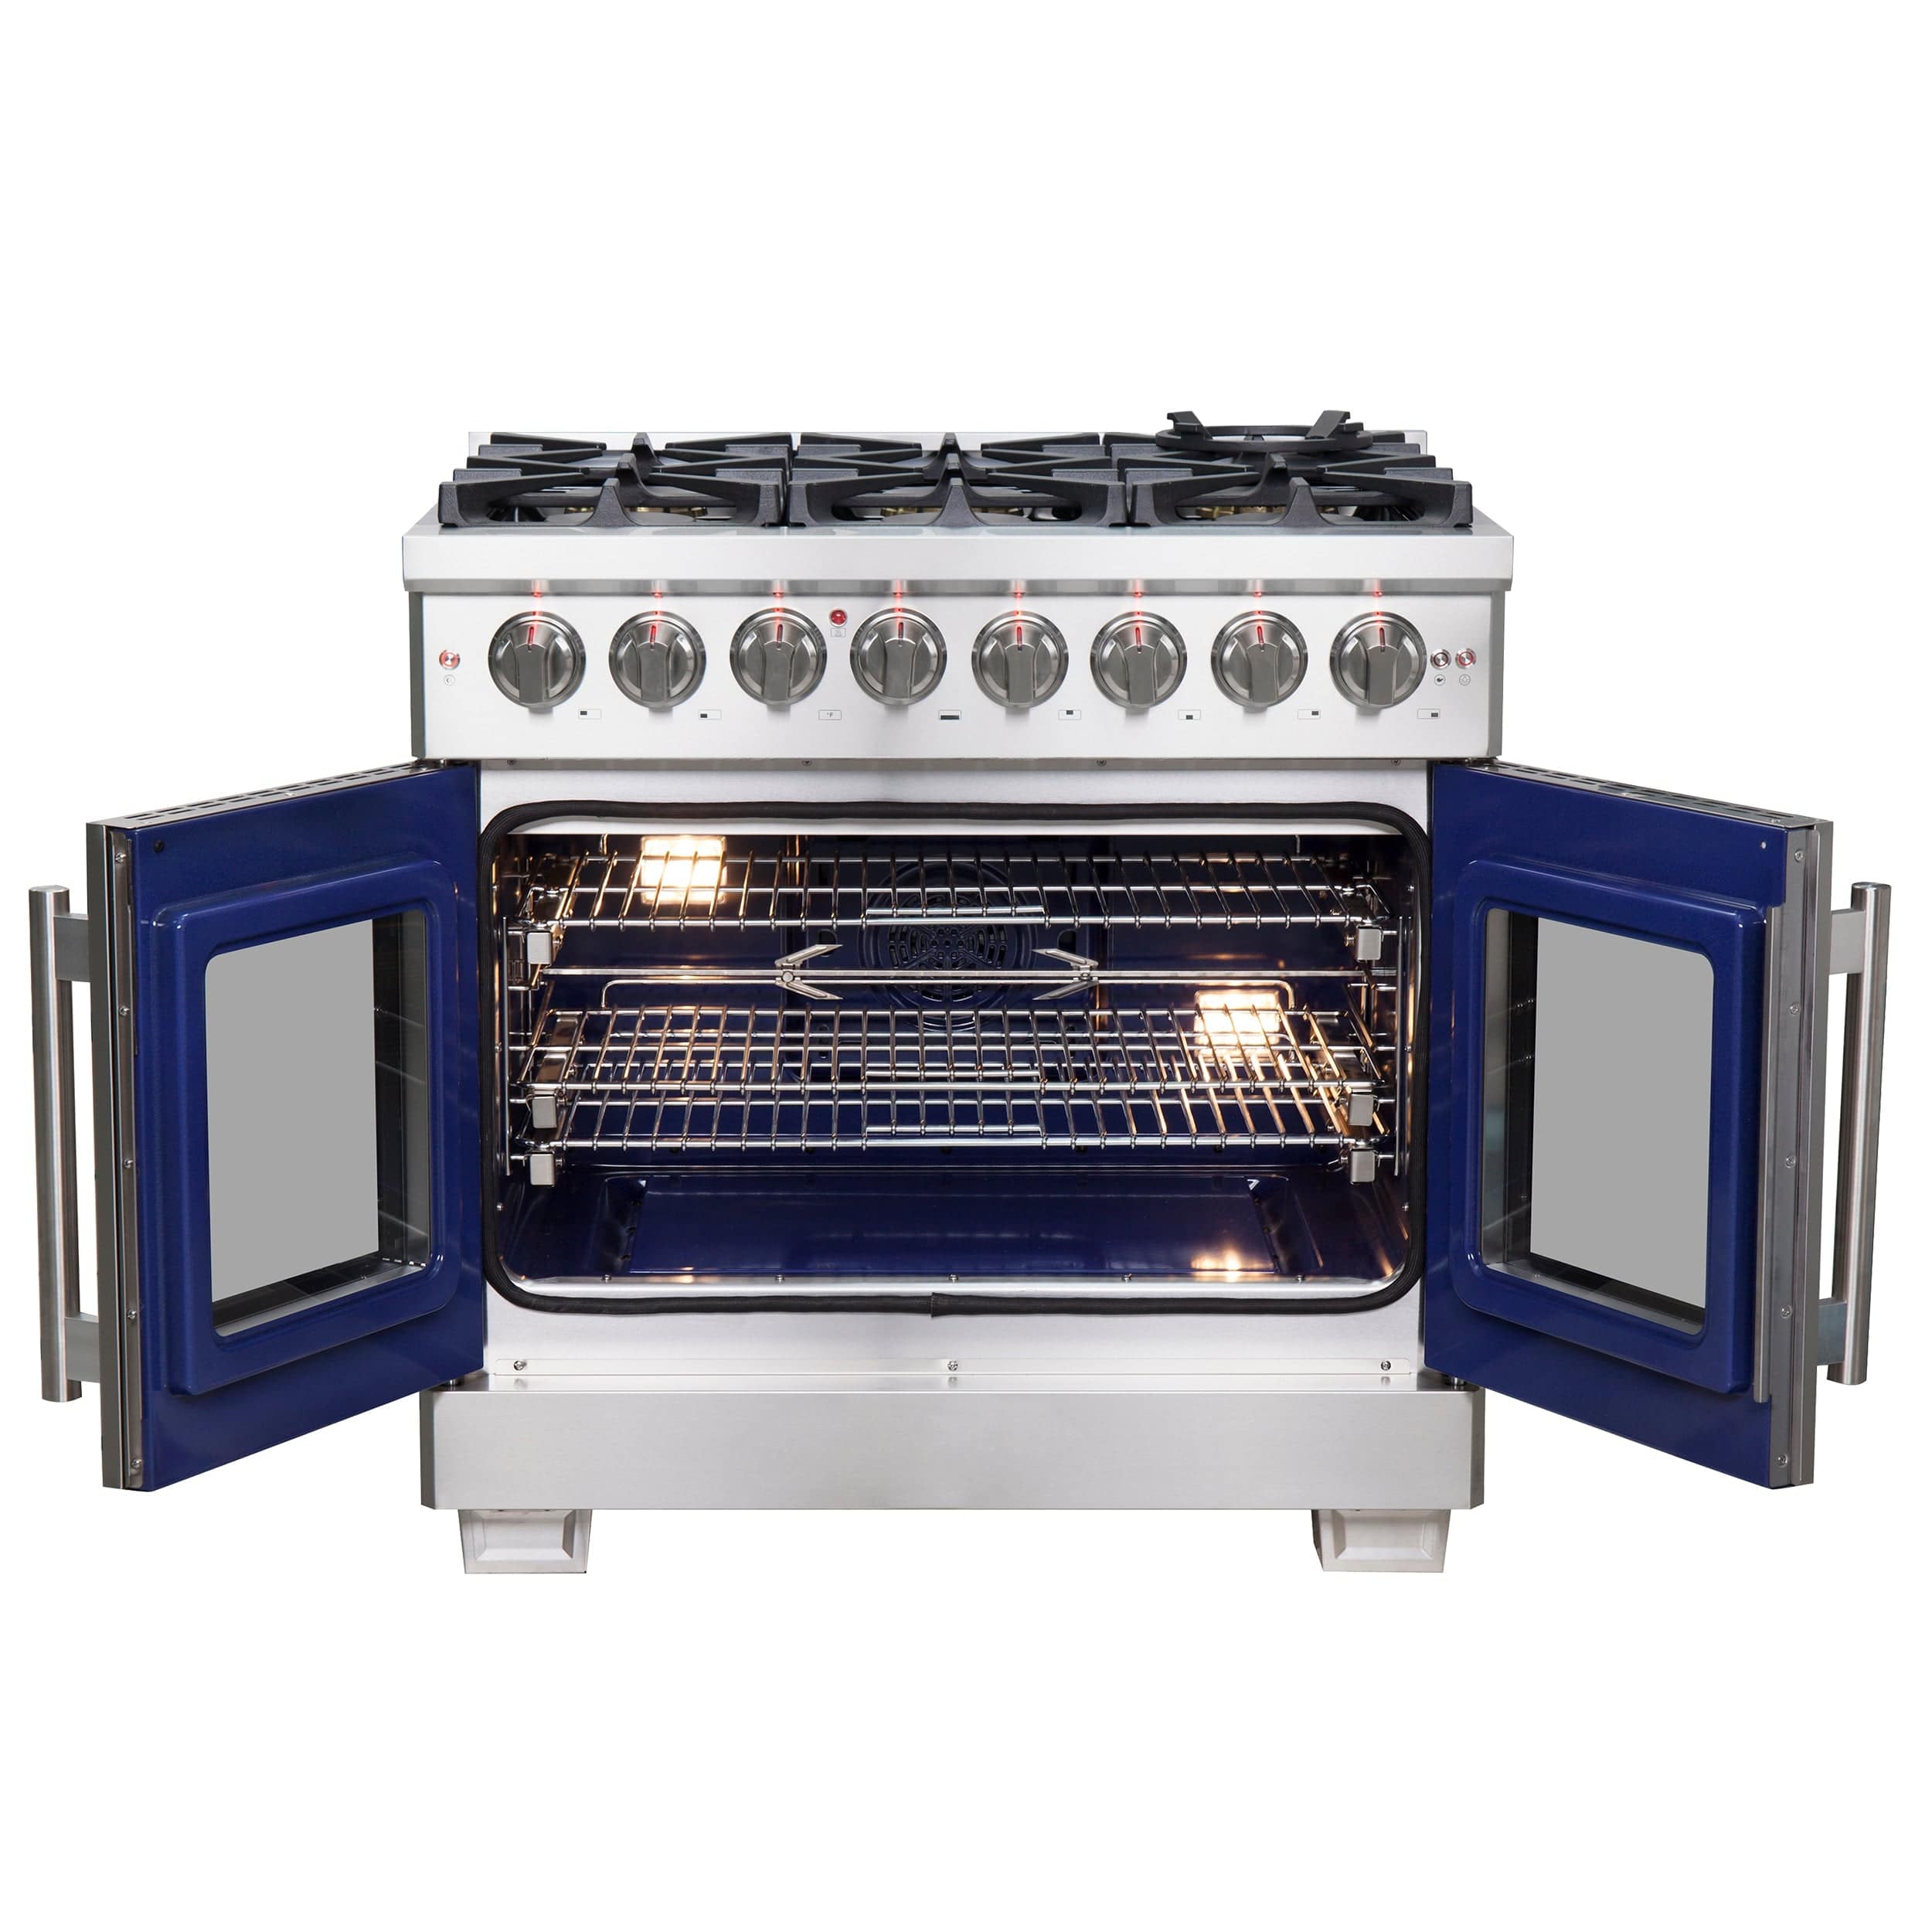 Forno Capriasca 36" Professional Gas Burner, Electric Oven Range With French Door And 6 Sealed Burners, FFSGS6387-36 Ranges FFSGS6387-36 Luxury Appliances Direct